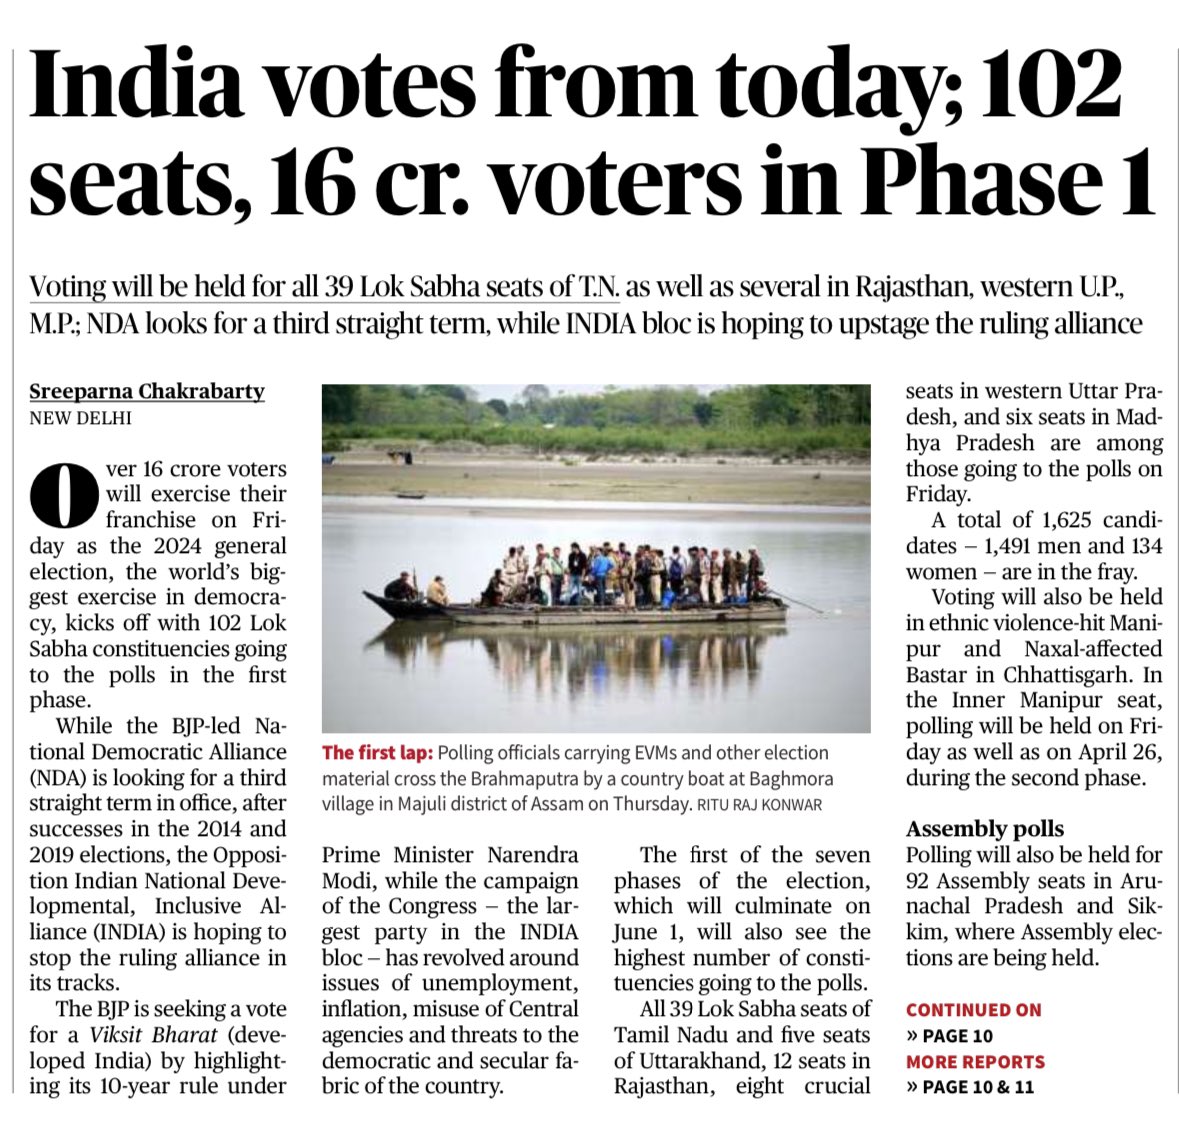 The largest democracy will start to exercise her right from today.

#JaiHind